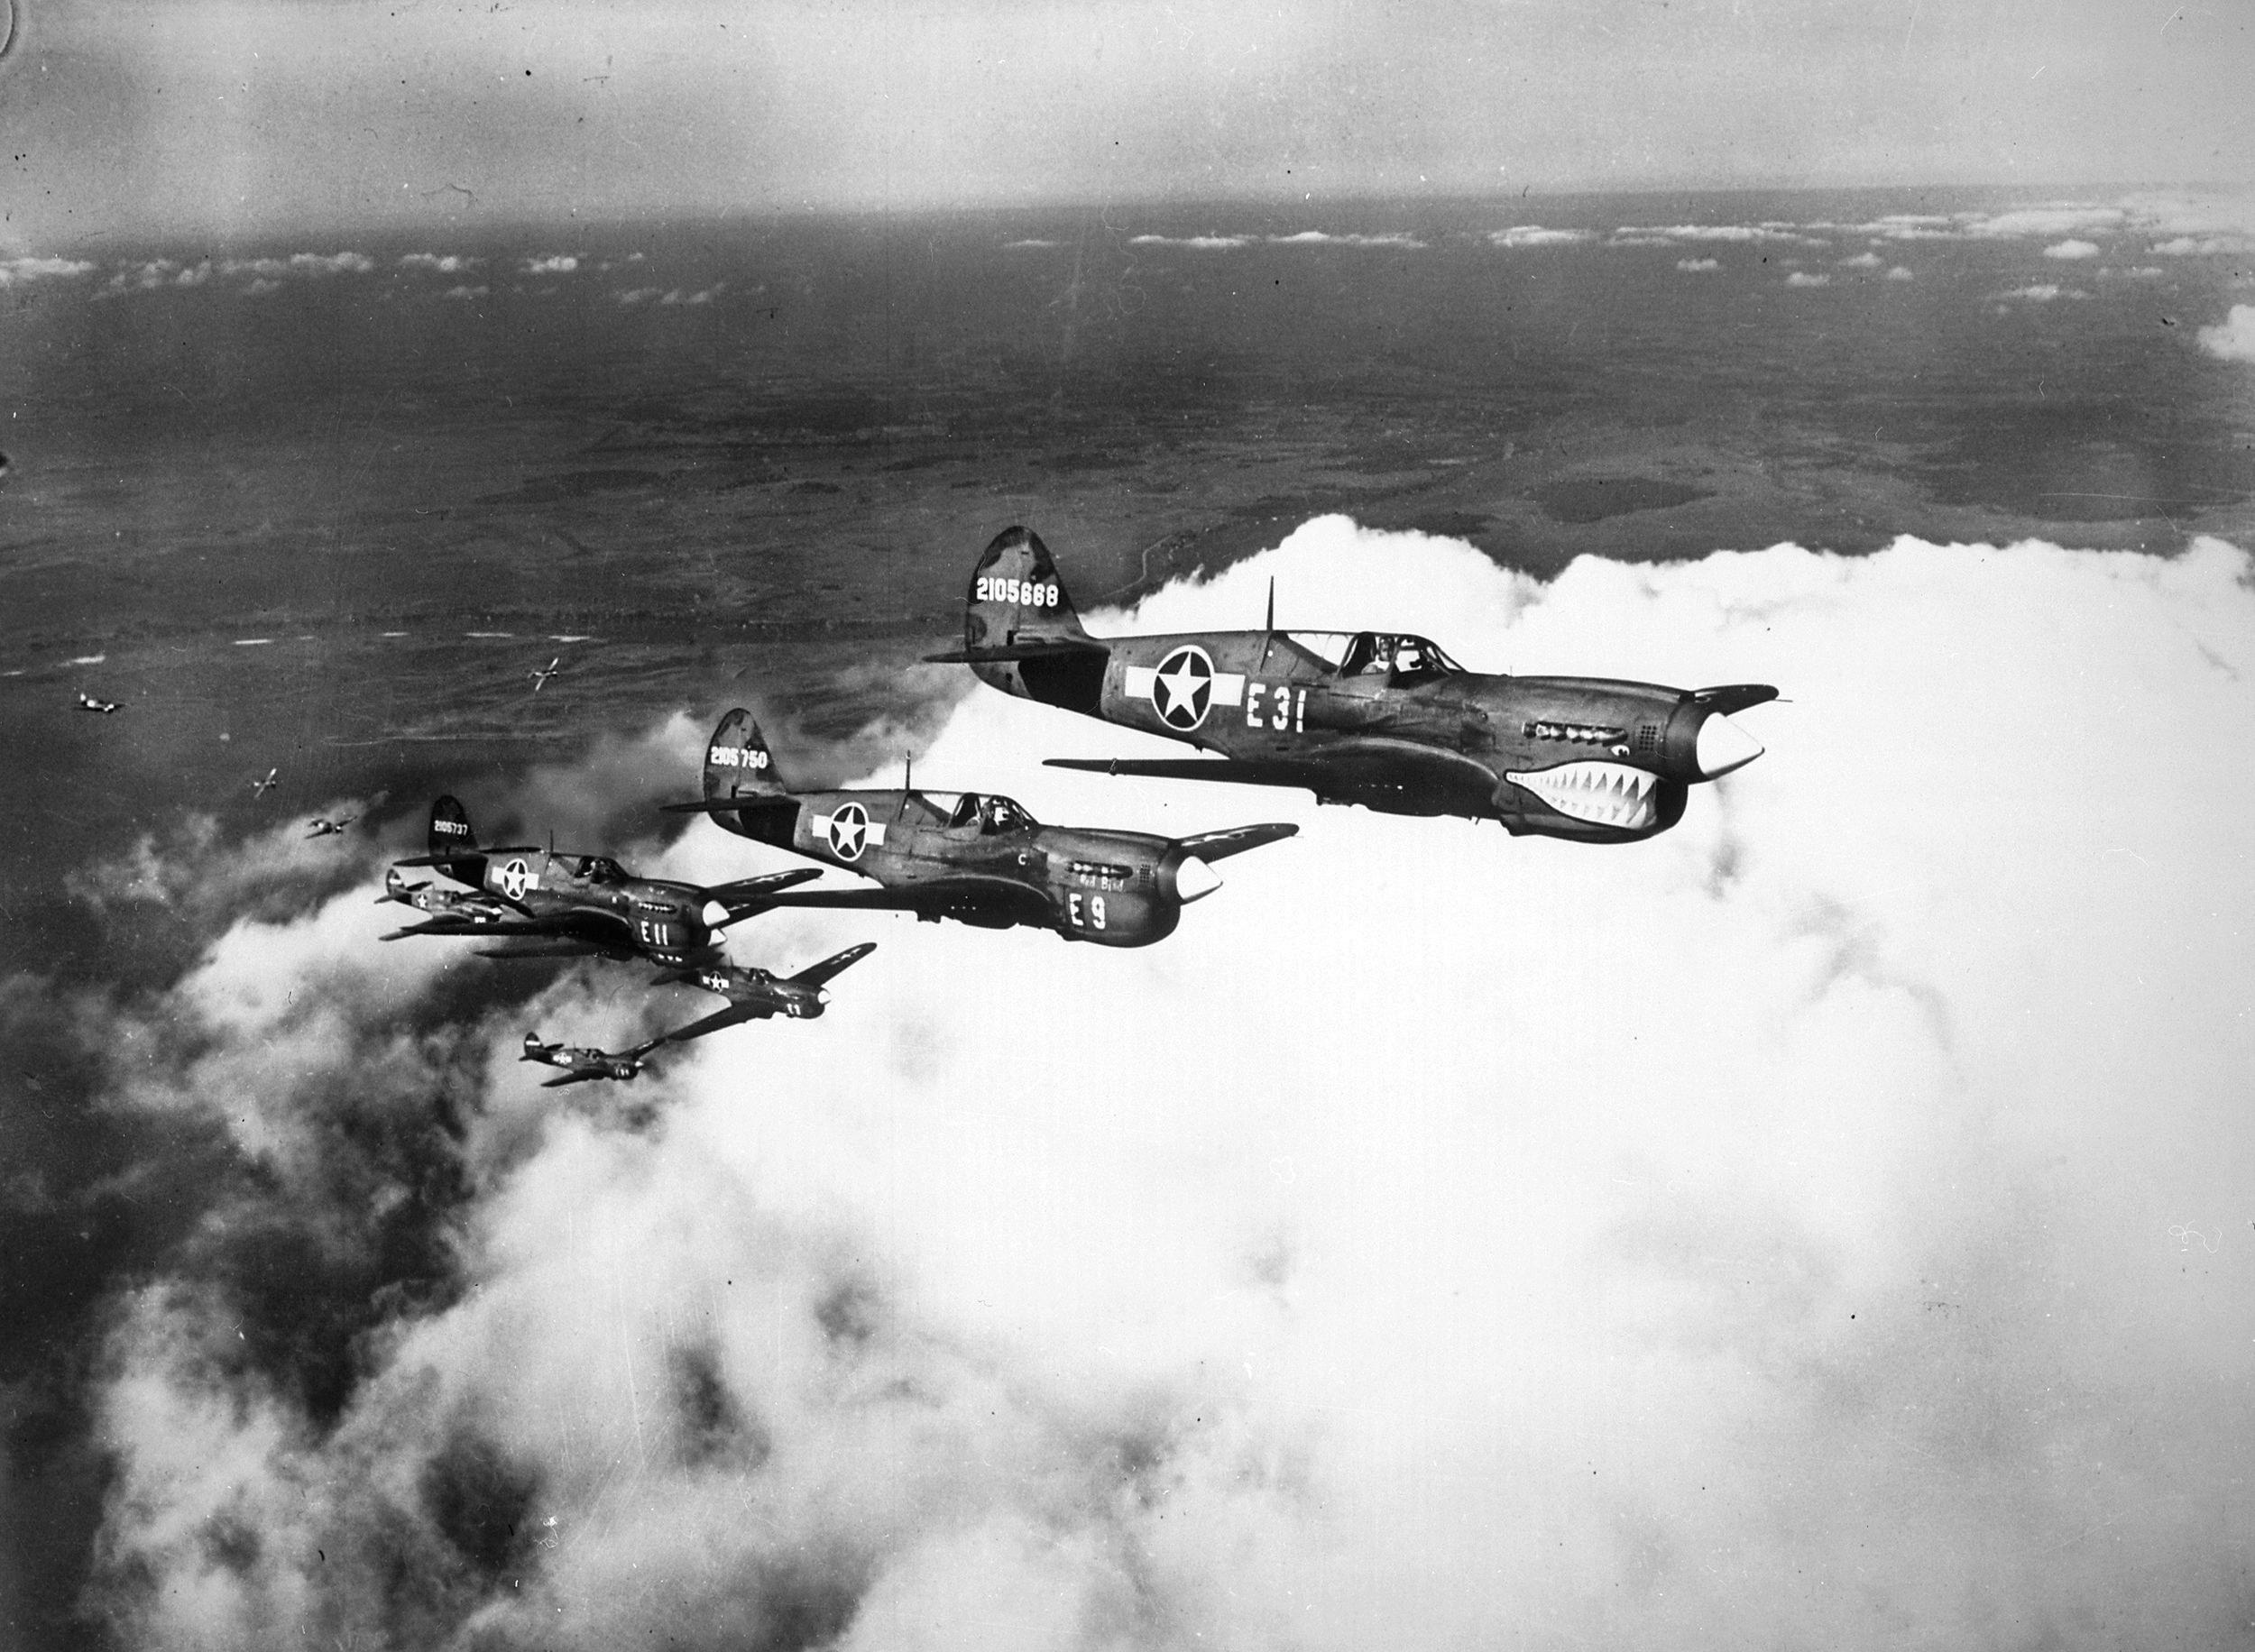 Before they were issued P-51 Mustangs in June 1944, the African American pilots of the 332nd Fighter Group flew obsolescent, shark-nosed P-40s, shown here, and then P-47 Thunderbolts.